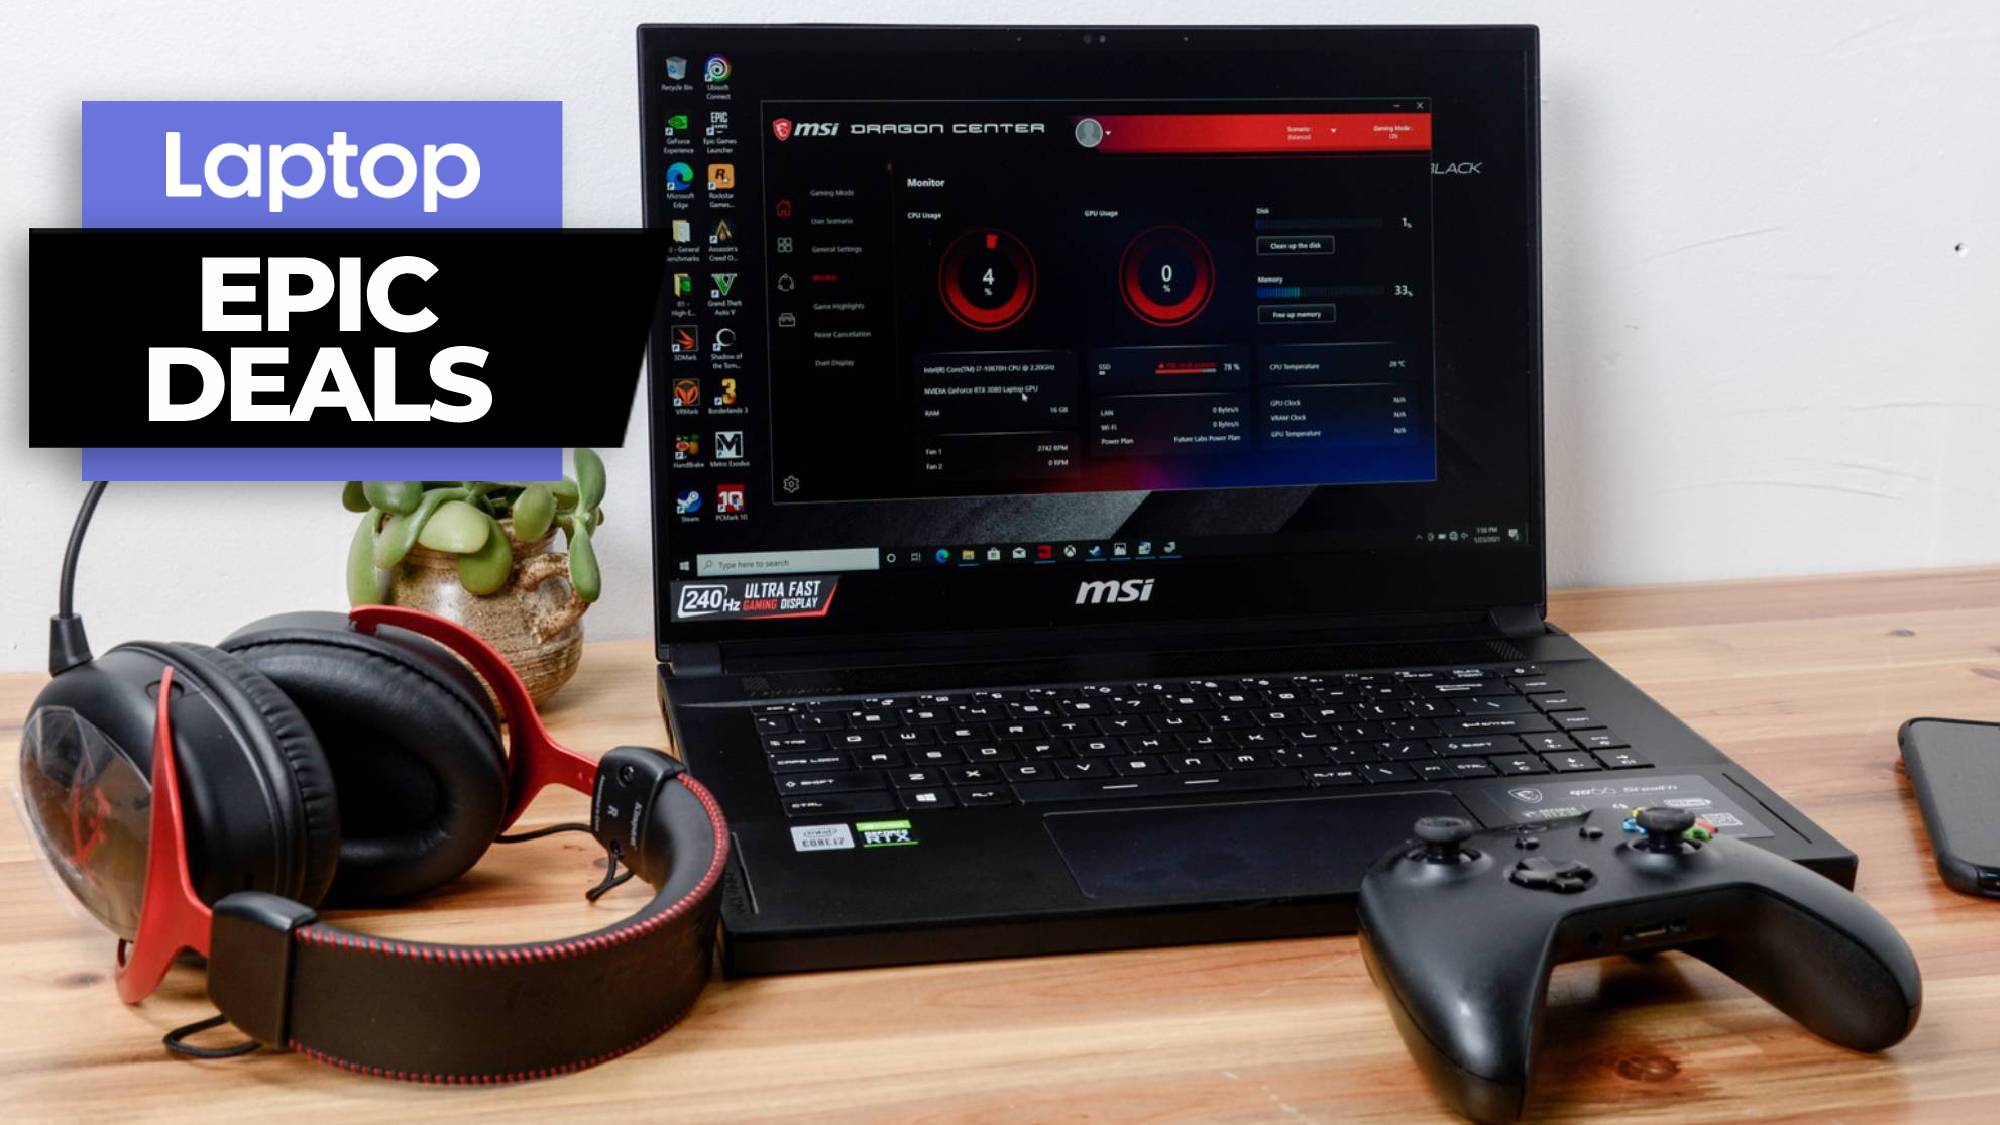 How to Find Staples Gaming Laptops Under Budget